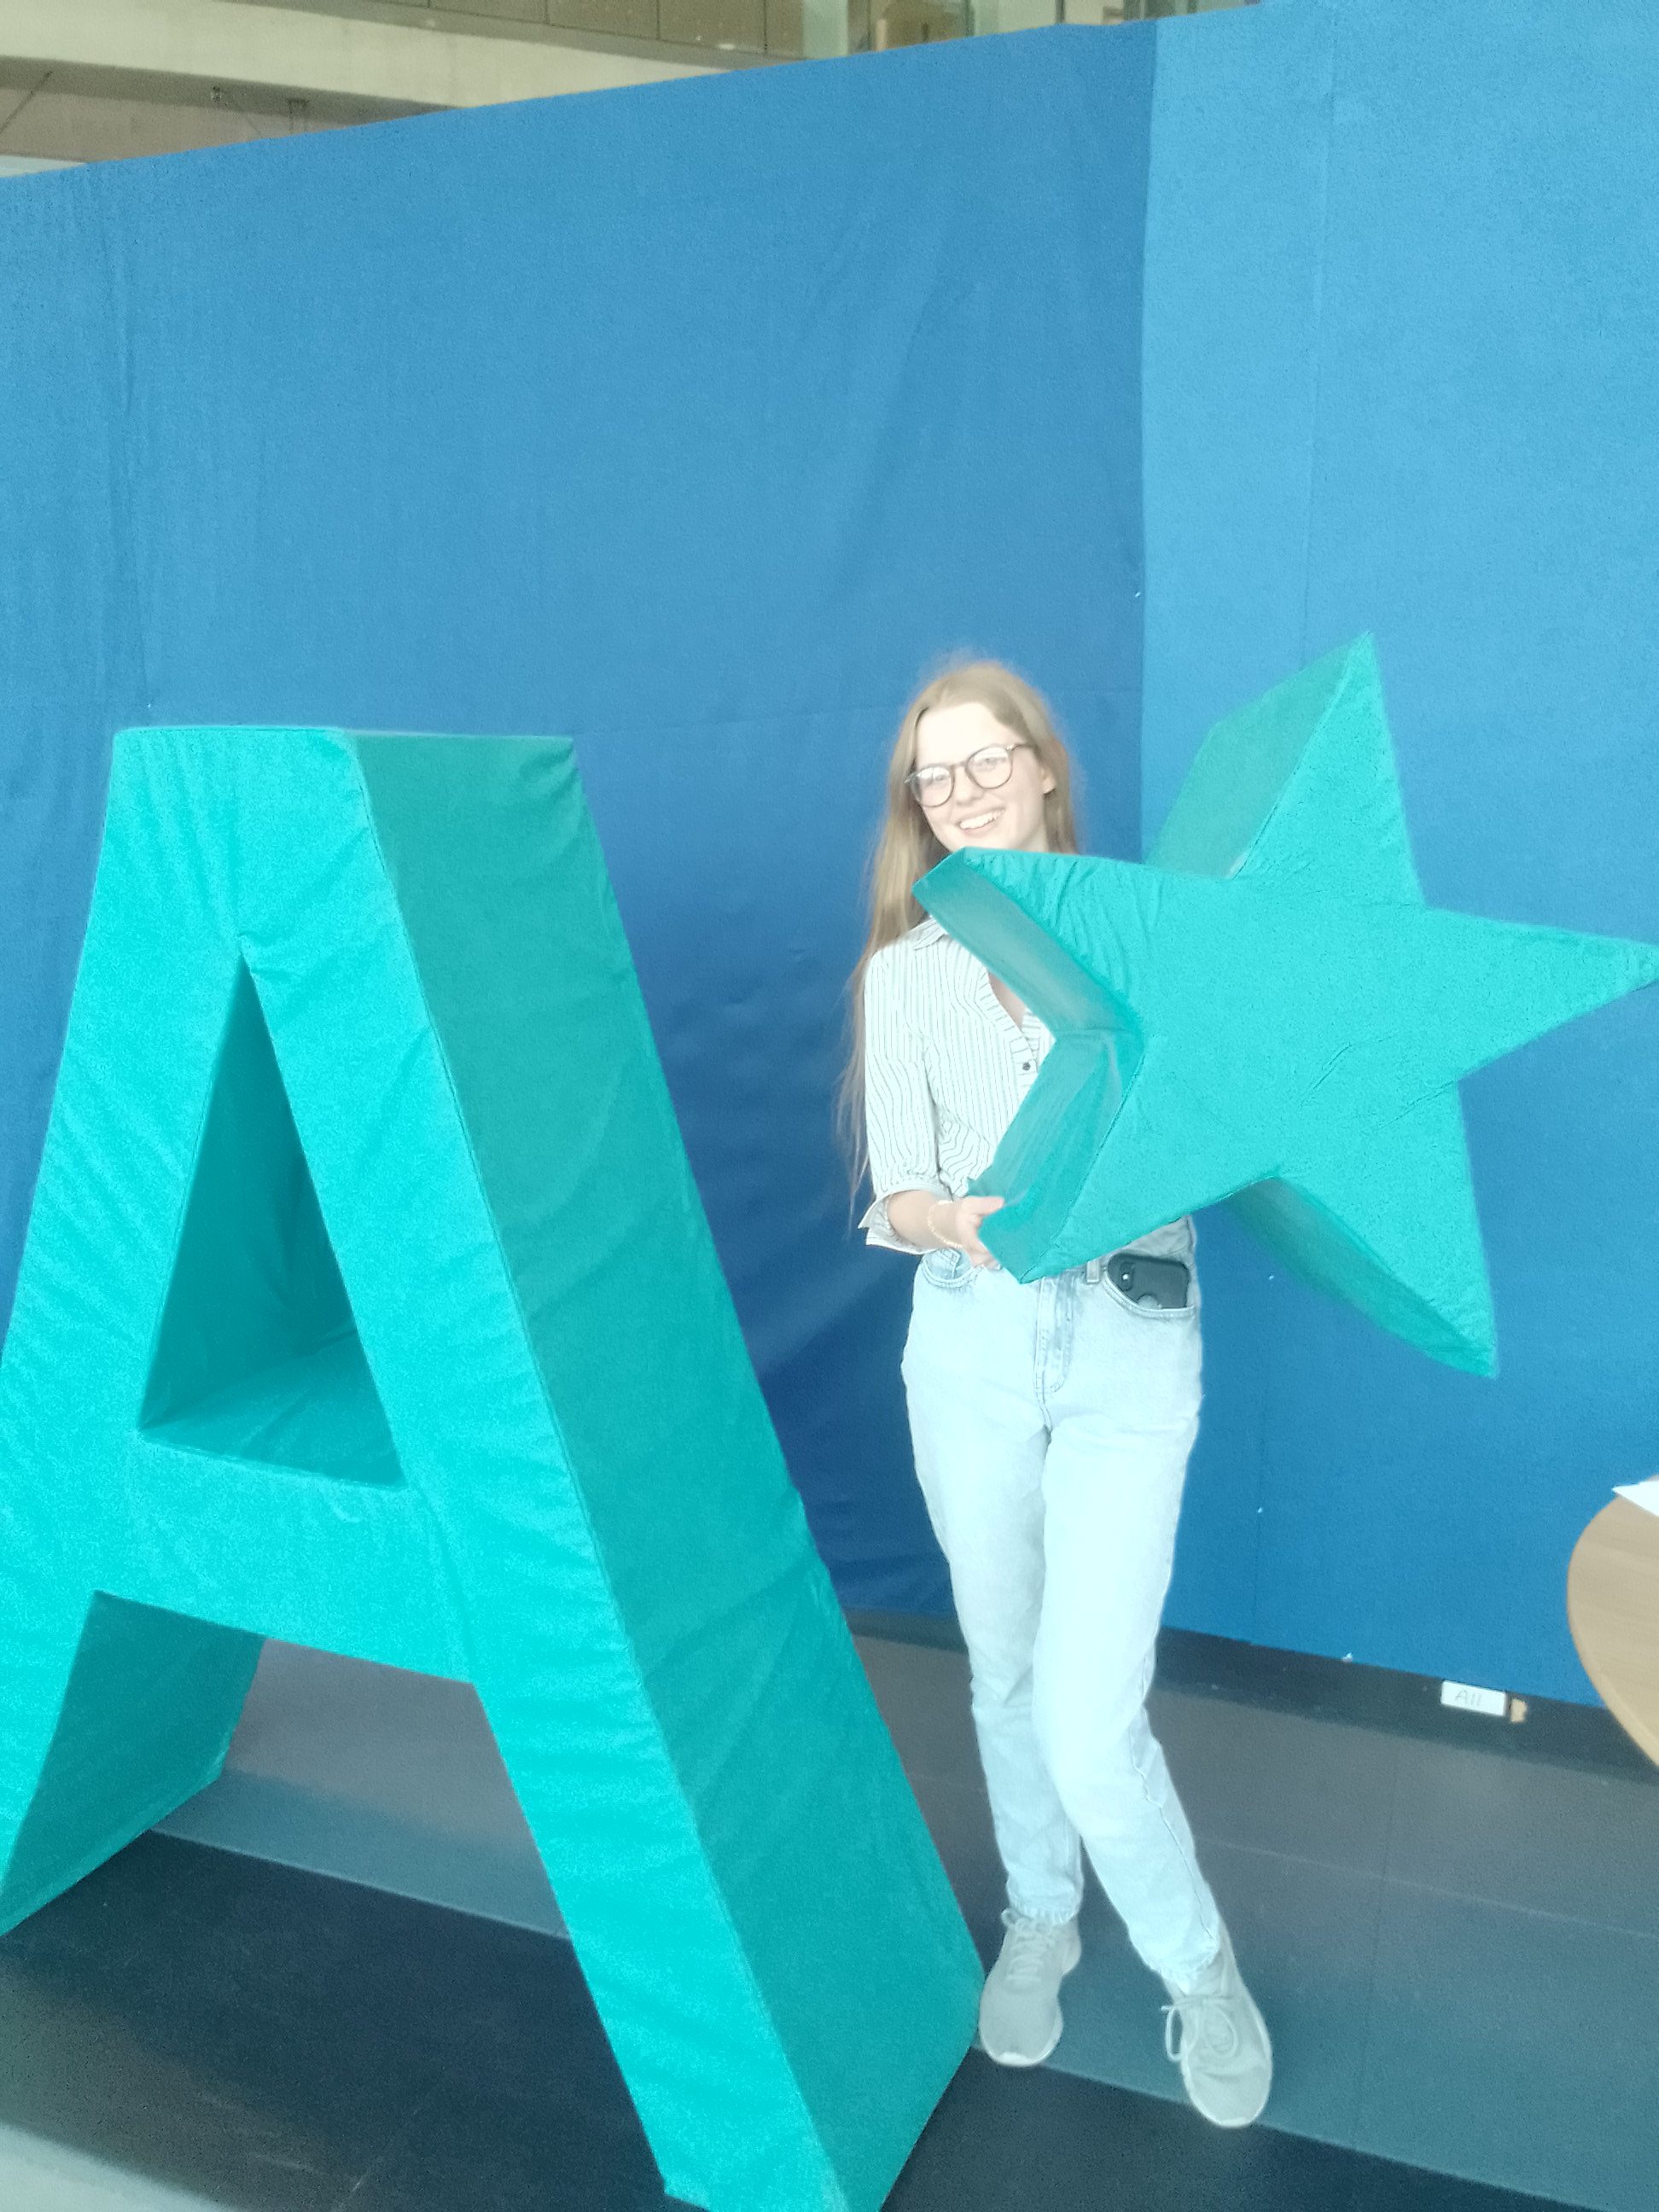 Georgina pictured on A Level results day with large blue A and star shapes